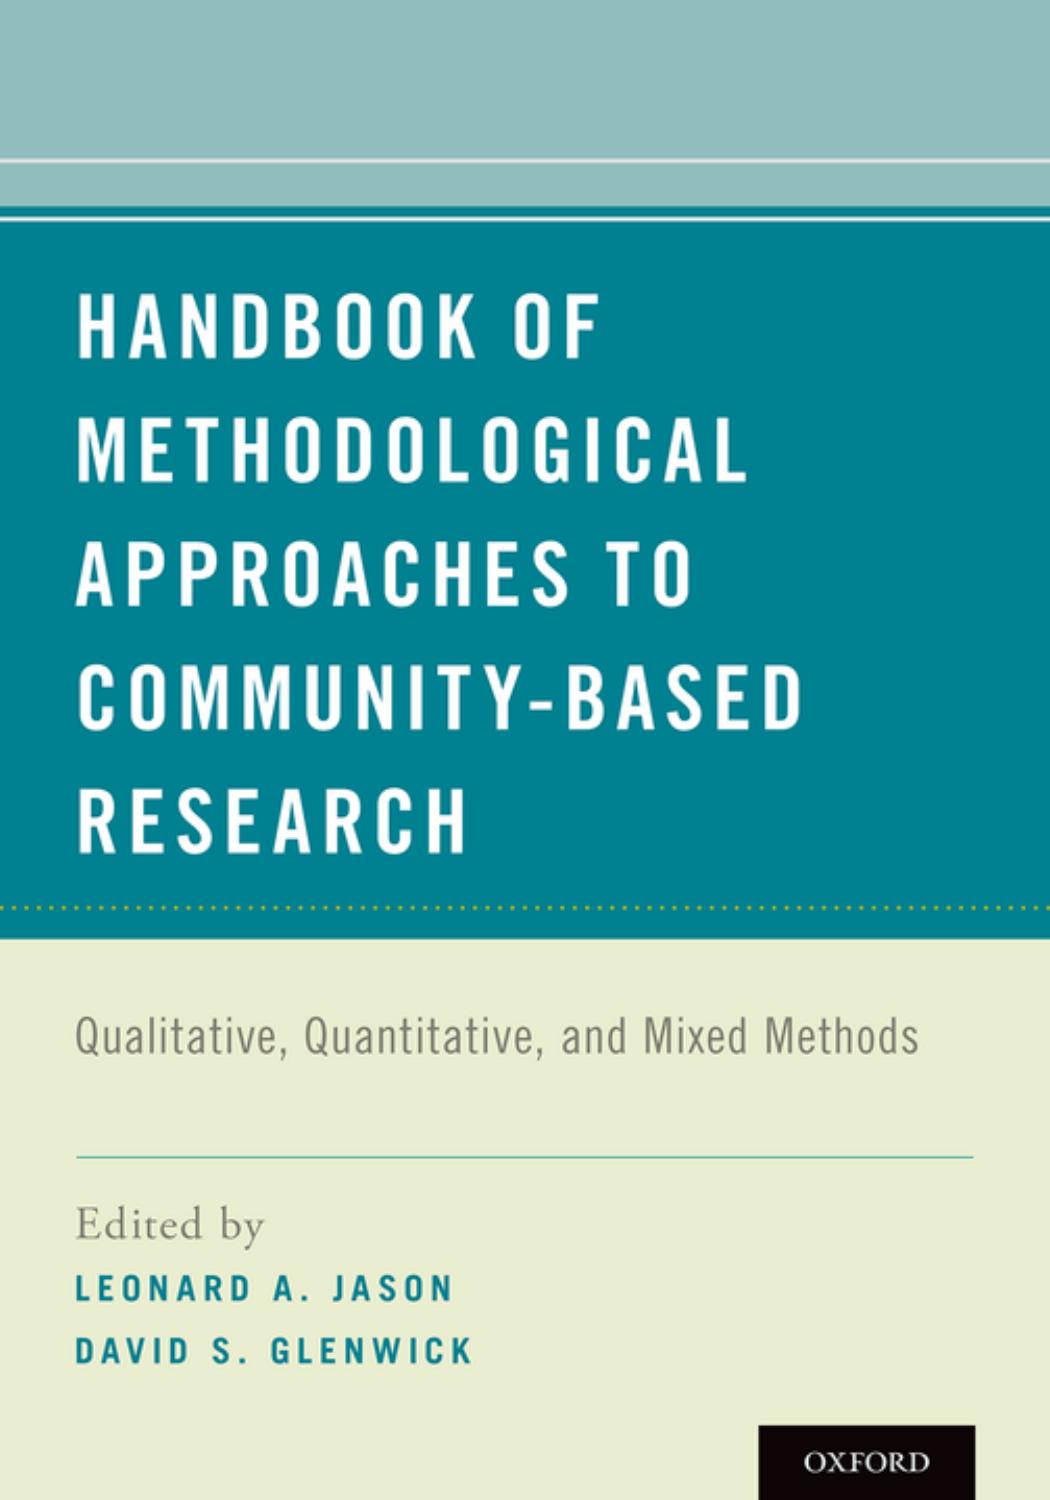 Handbook of Methodological Approaches to Community-Based Research: Qualitative, Quantitative, and Mixed Methods